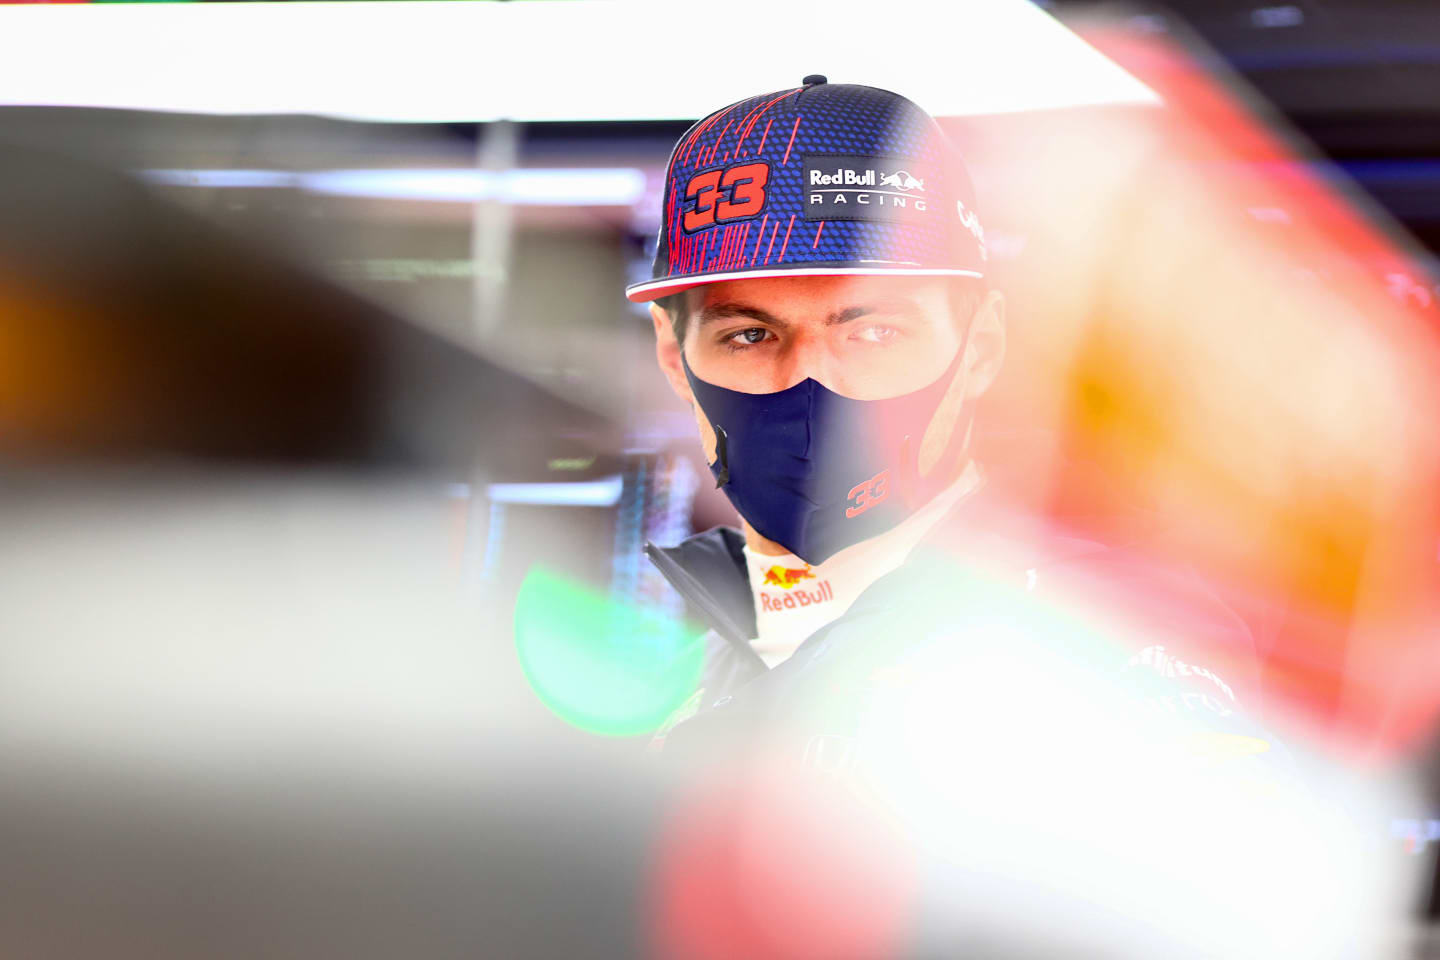 ISTANBUL, TURKEY - OCTOBER 09: Max Verstappen of Netherlands and Red Bull Racing looks on in the garage during final practice ahead of the F1 Grand Prix of Turkey at Intercity Istanbul Park on October 09, 2021 in Istanbul, Turkey. (Photo by Mark Thompson/Getty Images)